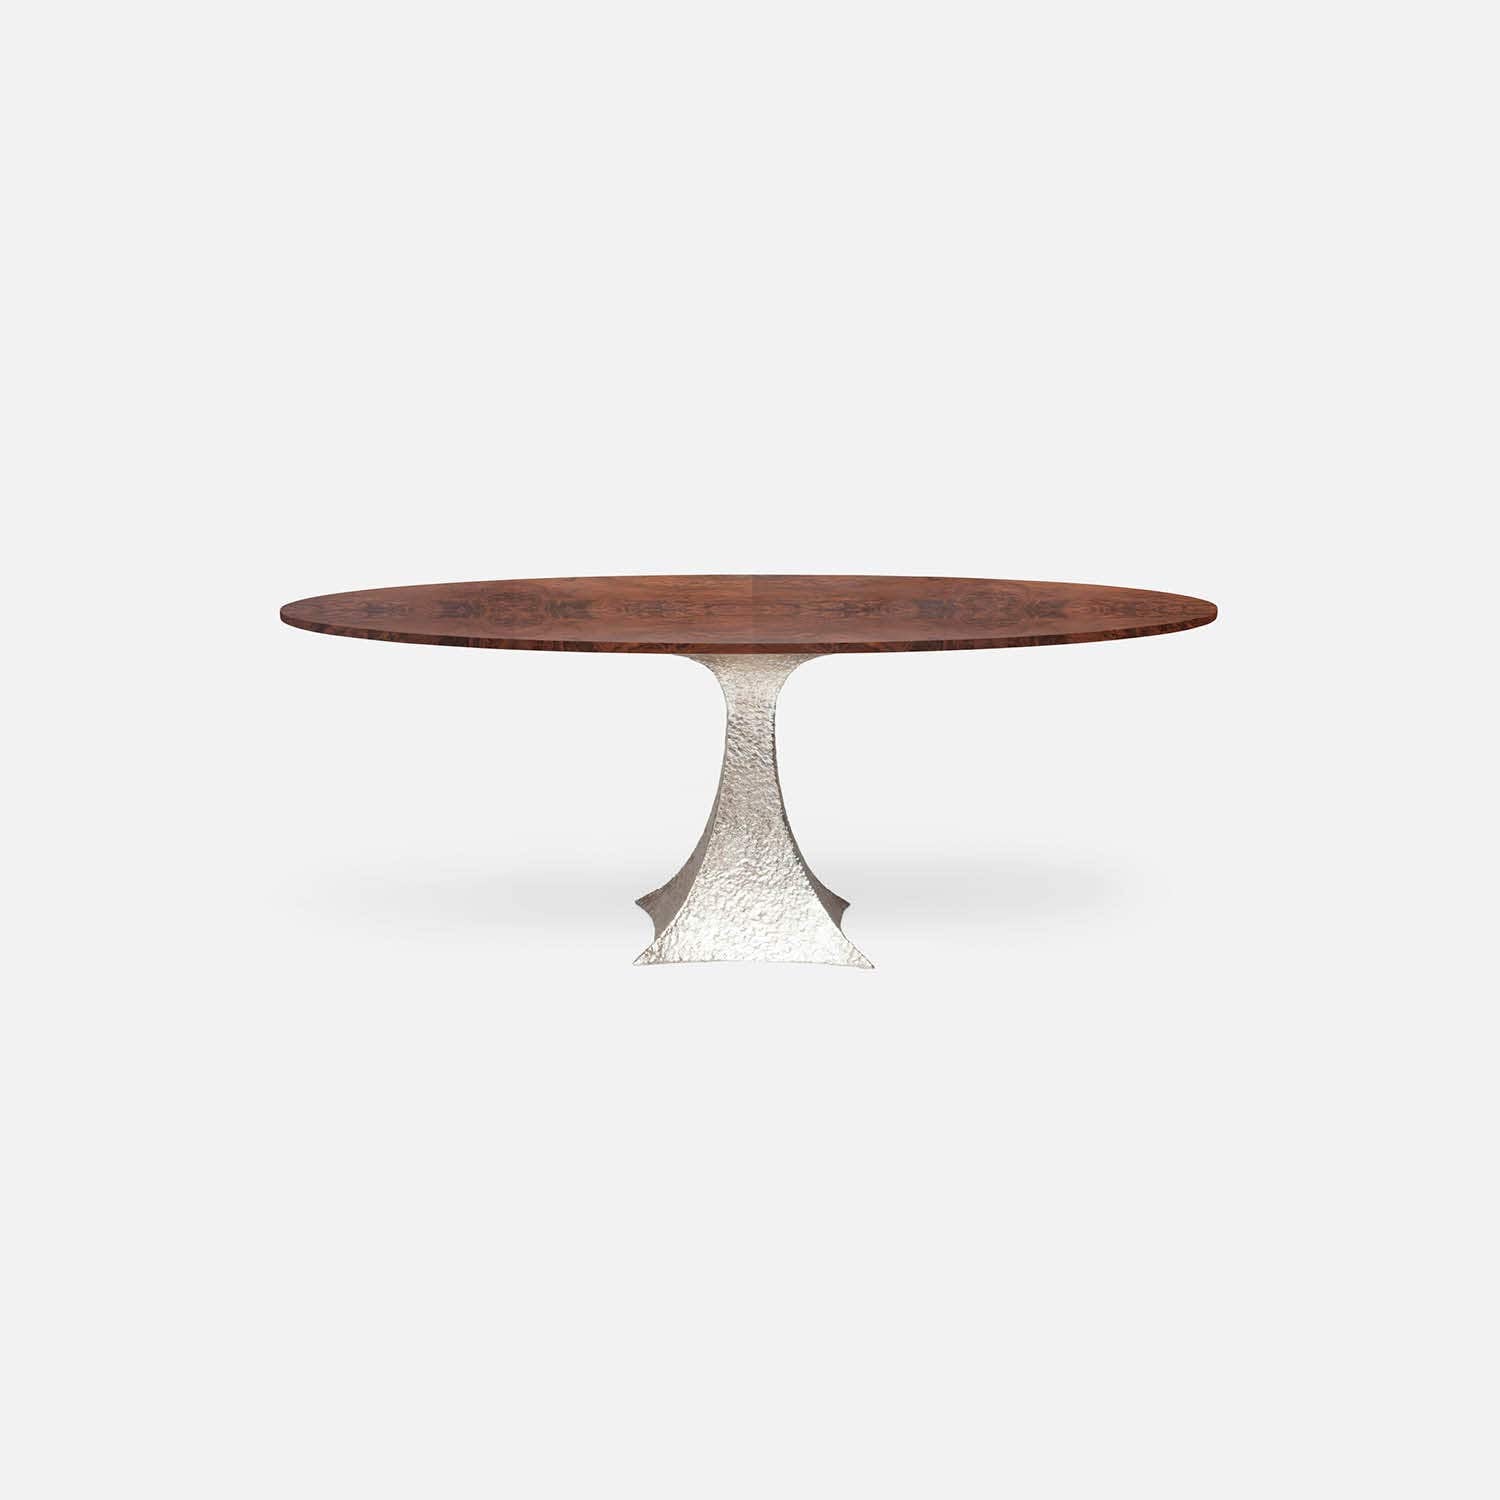 Made Goods Noor 72" x 42" x 30" Single Base Bumpy Cool Silver Iron Dinning Table With Oval Walnut Veneer Table Top